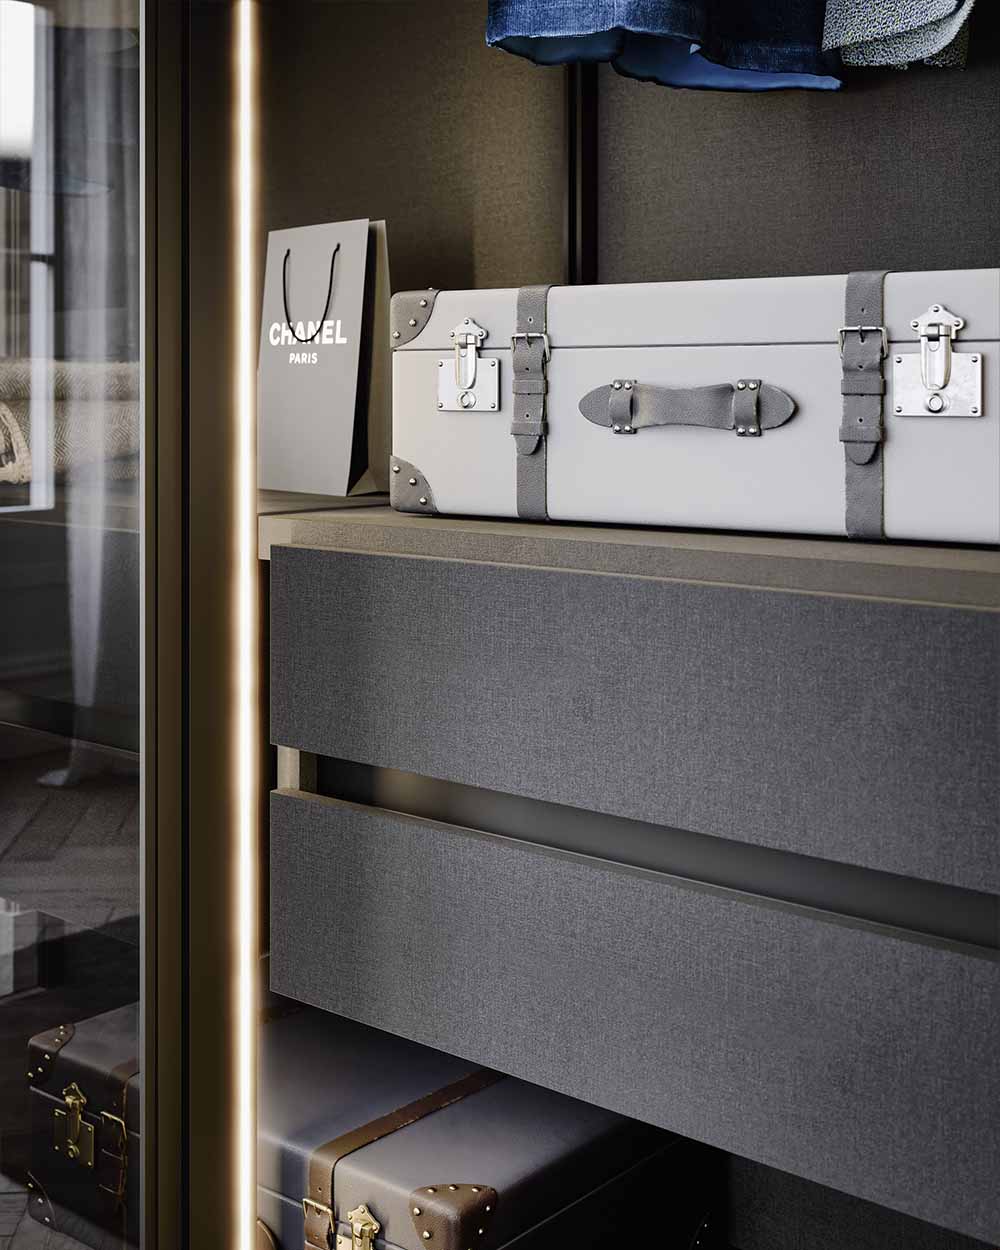 Modern, luxury glass wardrobe system. Designed to fit your interior and fitted by Krieder interior experts.